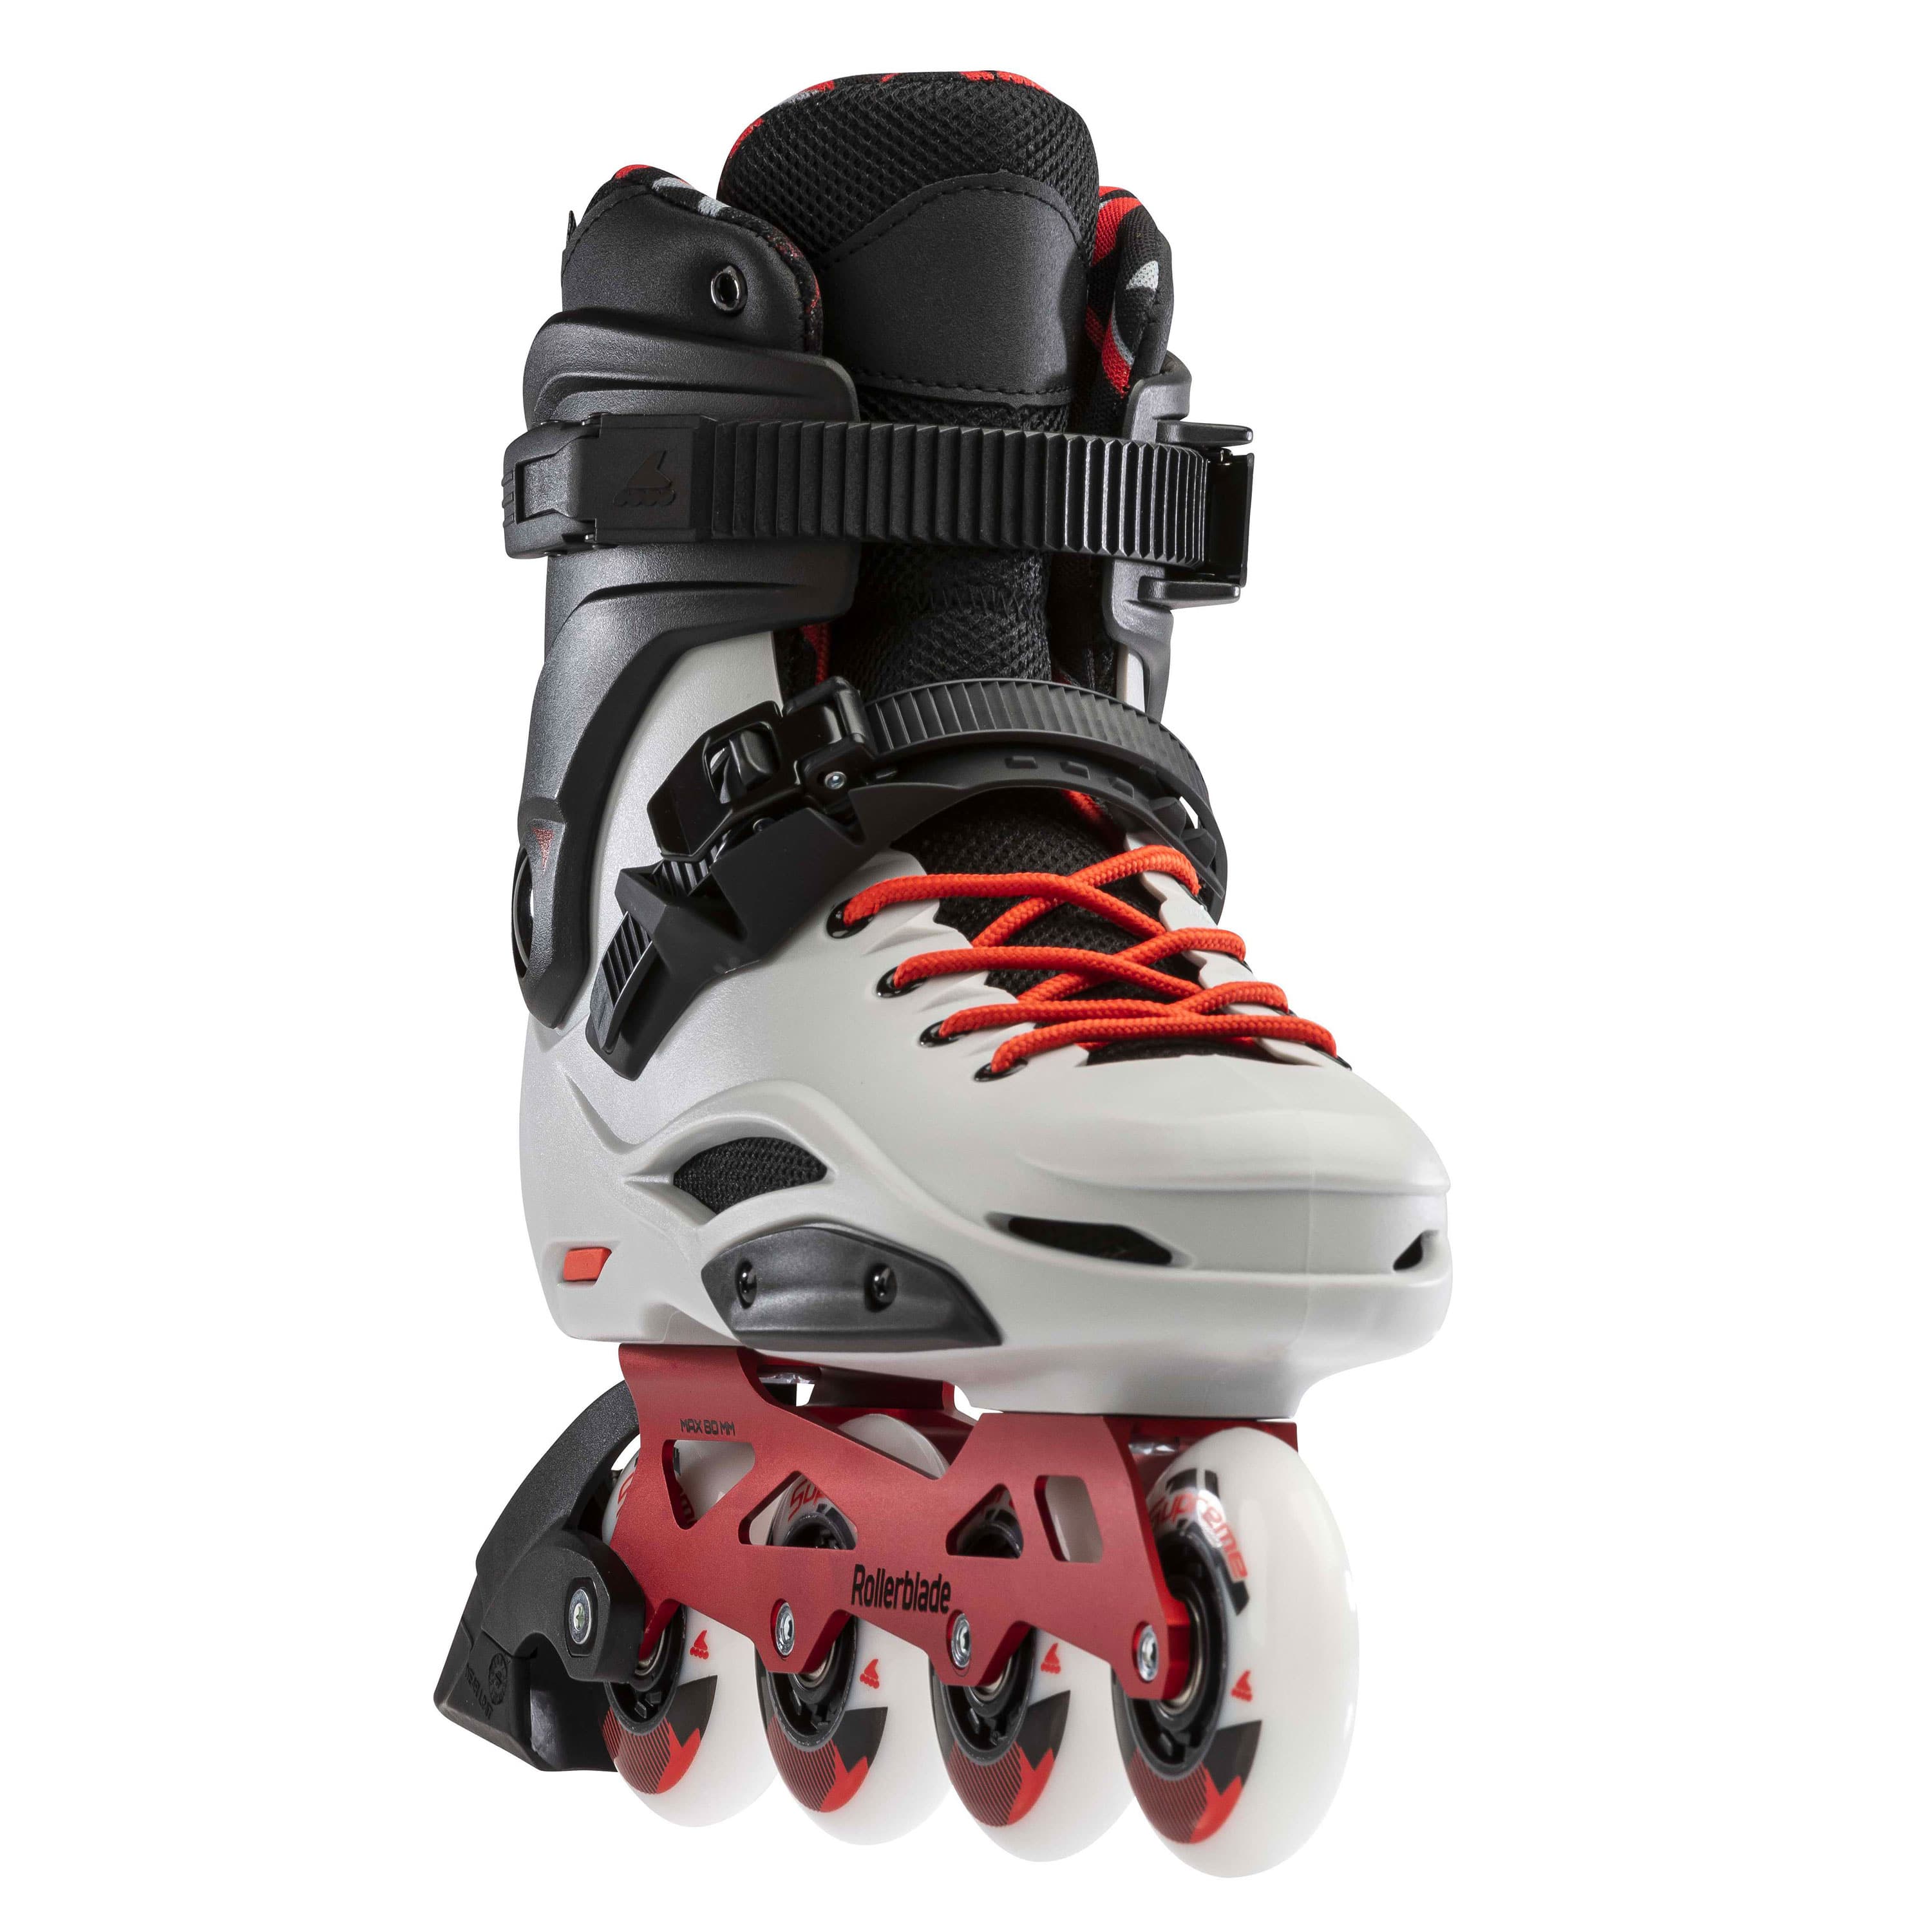 Rollerblade RB pro X red grey inline skate with 4 white wheels of 80mm